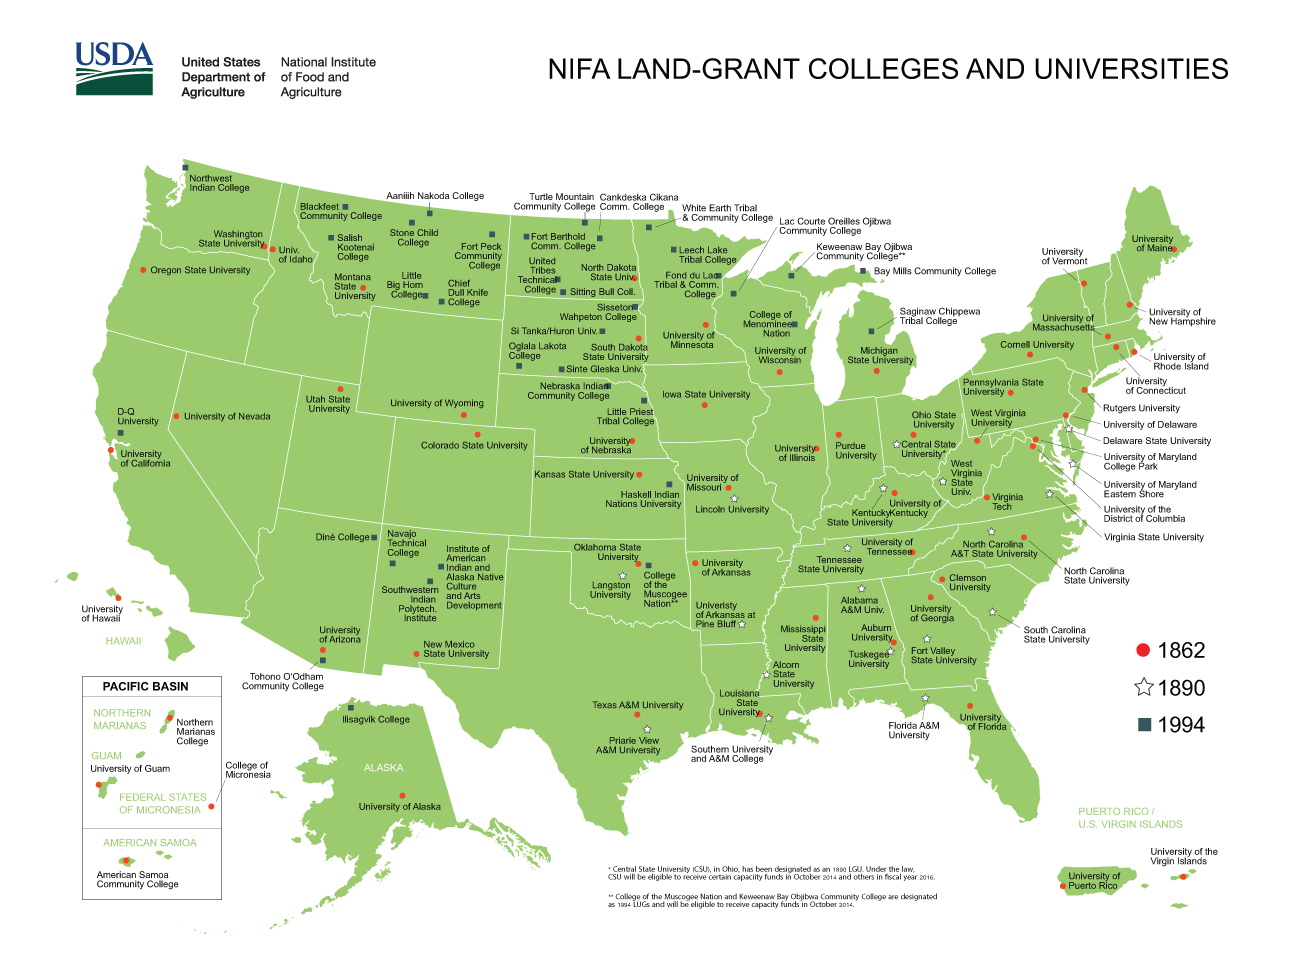 United States Department of Agriculture, National Institute of Food and Agriculture, Land- Grant Colleges and Universities.